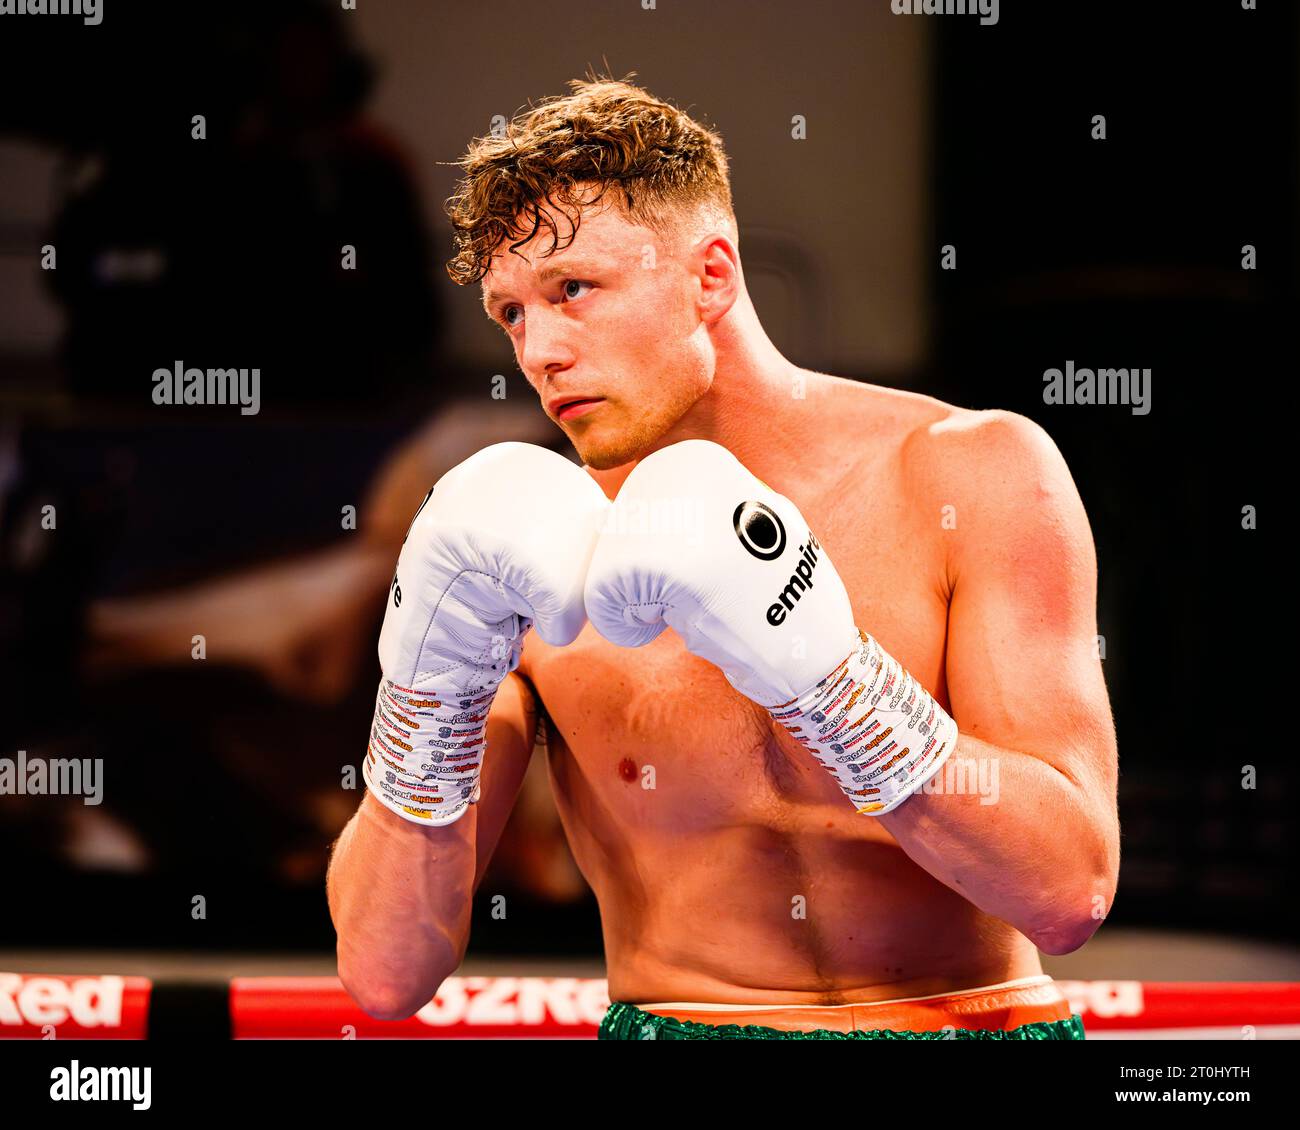 LONDON, UNITED KINGDOM. 06 Oct, 23. Carl Fail vs Angel Emilov - International Super-Welterweight Contest during Zorro vs D'Ortenzi Fight Night and undercards at York Hall on Friday, October 06, 2023 in LONDON, ENGLAND. Credit: Taka G Wu/Alamy Live News Stock Photo